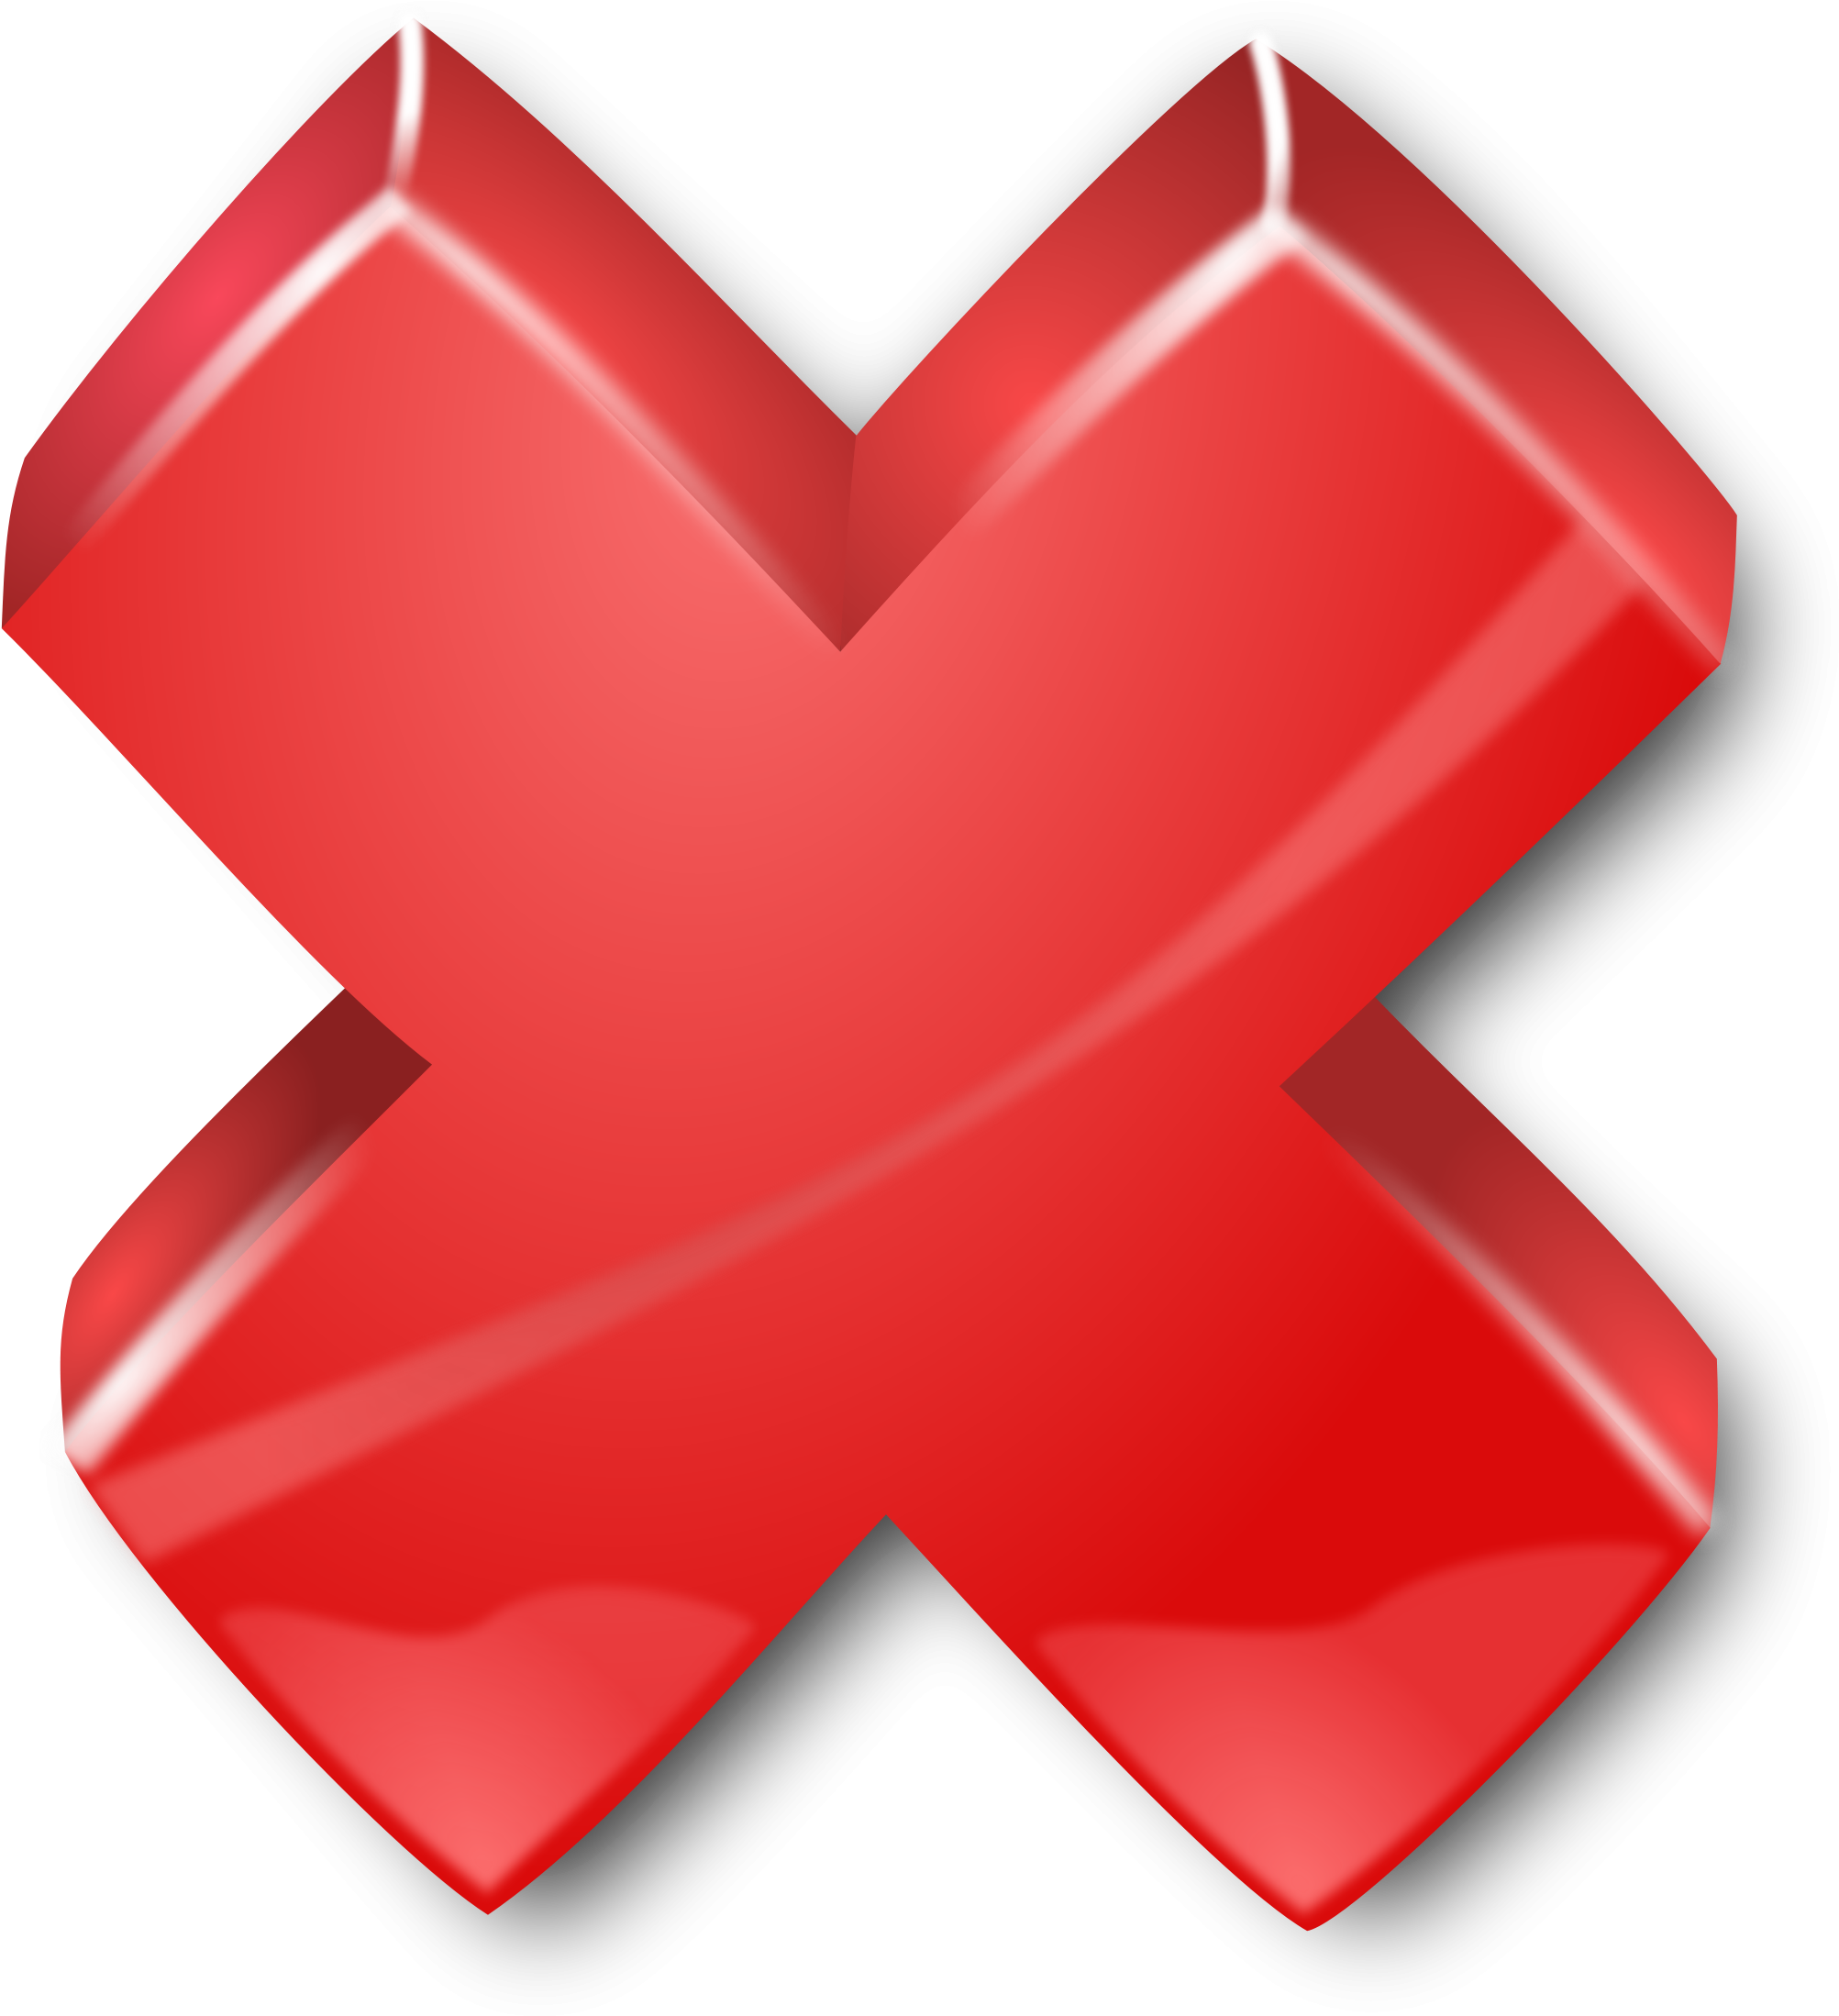 A Red X Symbol With Black Background